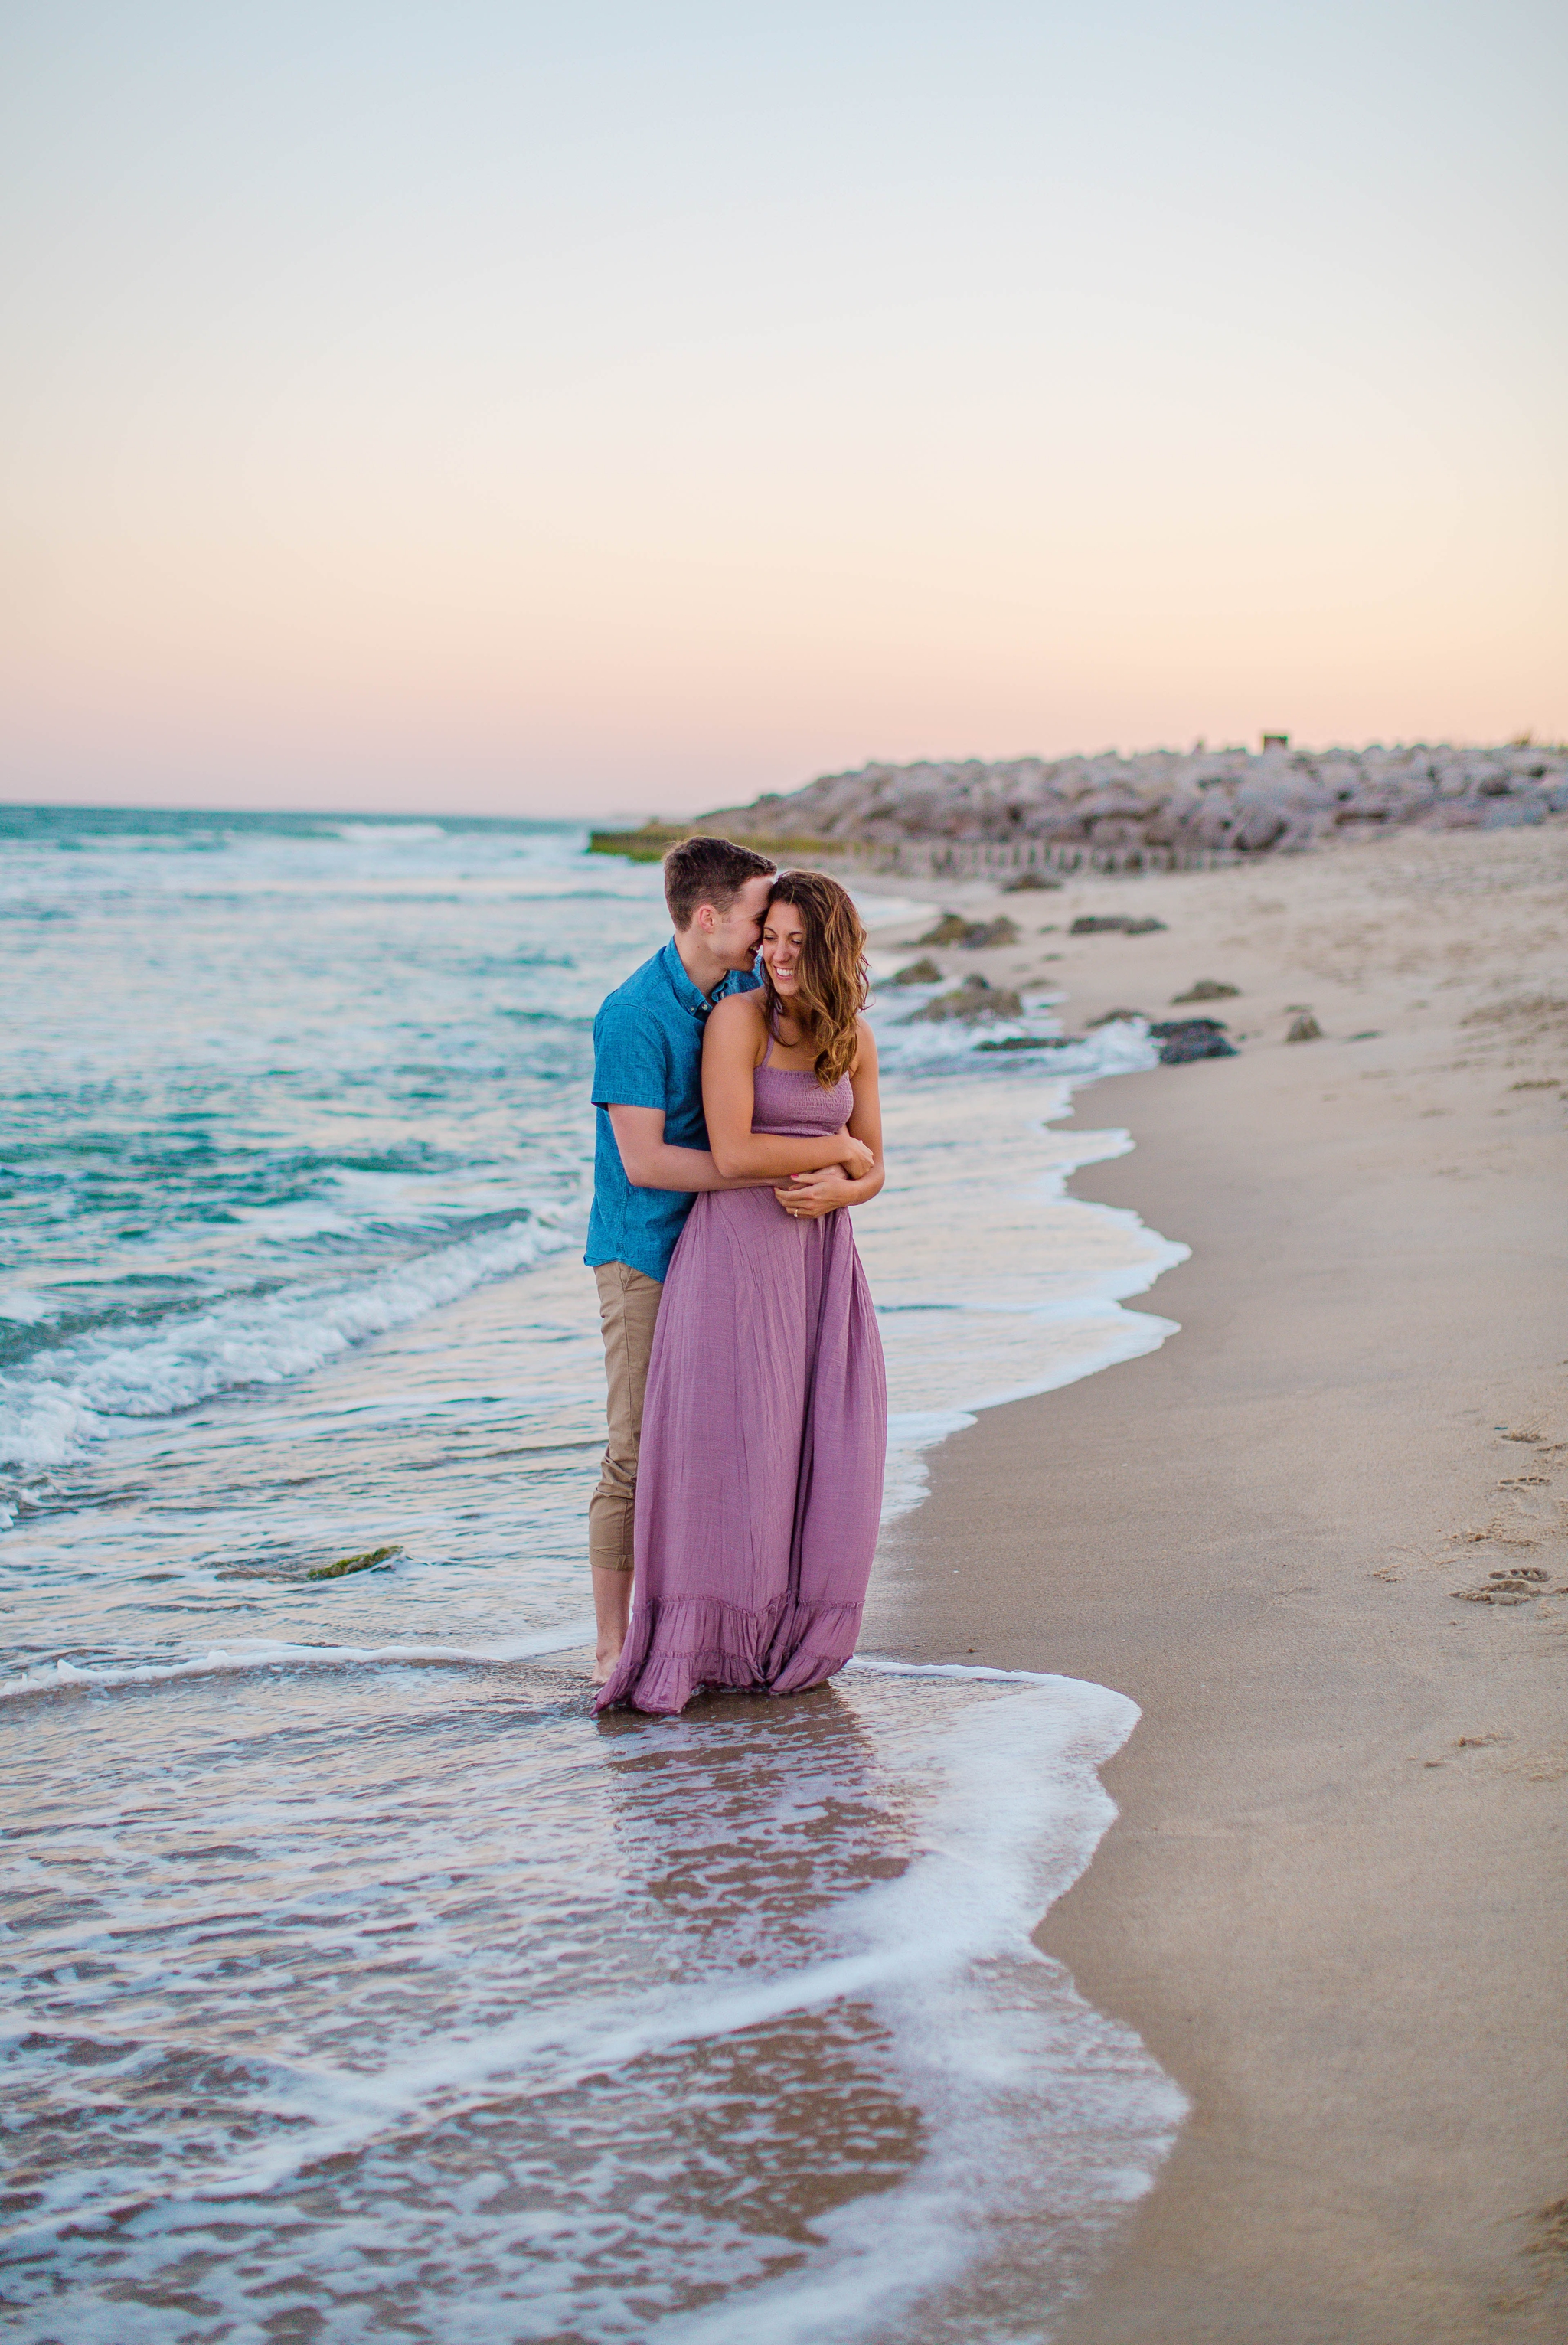  man and woman standing in the water and cuddling - - Woman is in a flowy pastel maxi dress - candid and unposed golden light session - beach engagement photographer in honolulu, oahu, hawaii - johanna dye photography 